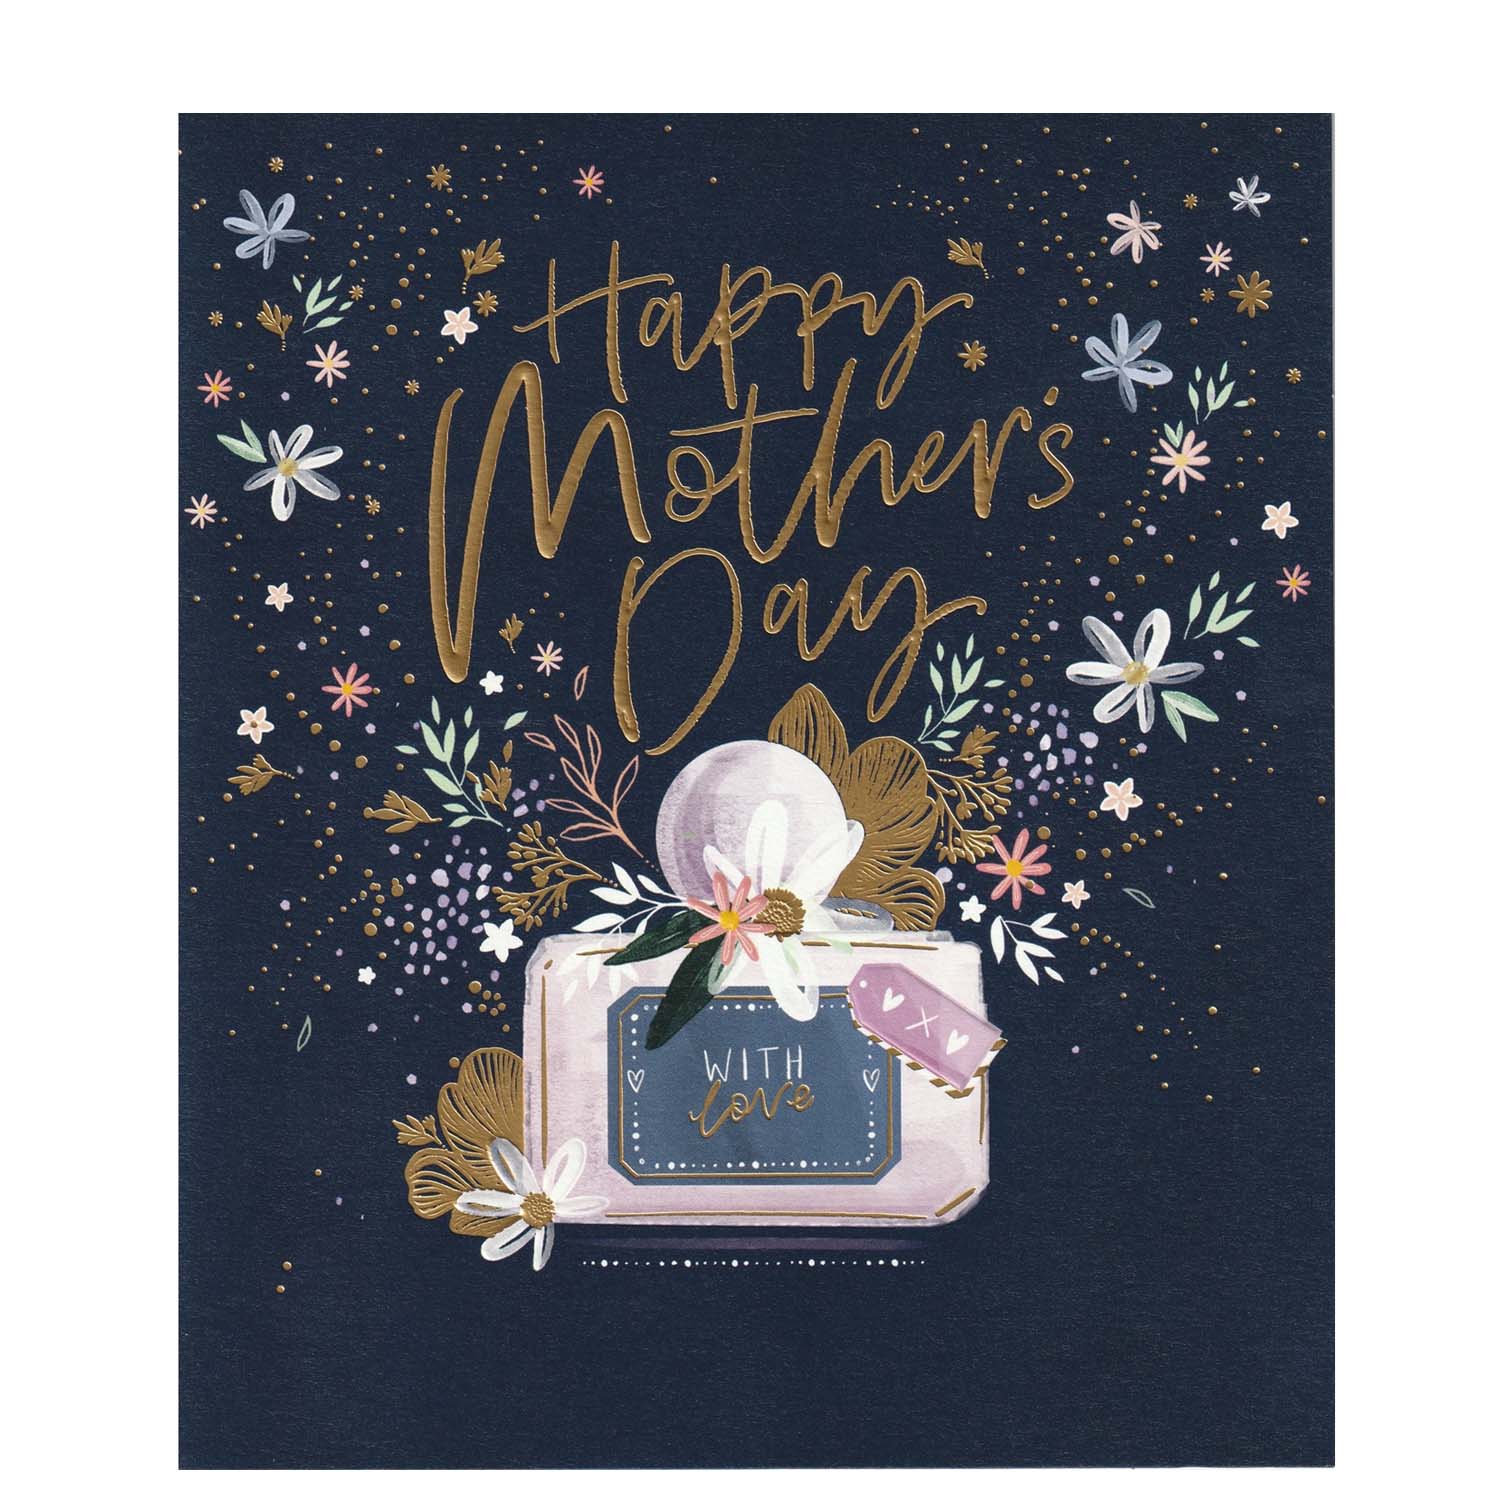 Happy Mothers Day With Love Greeting Card